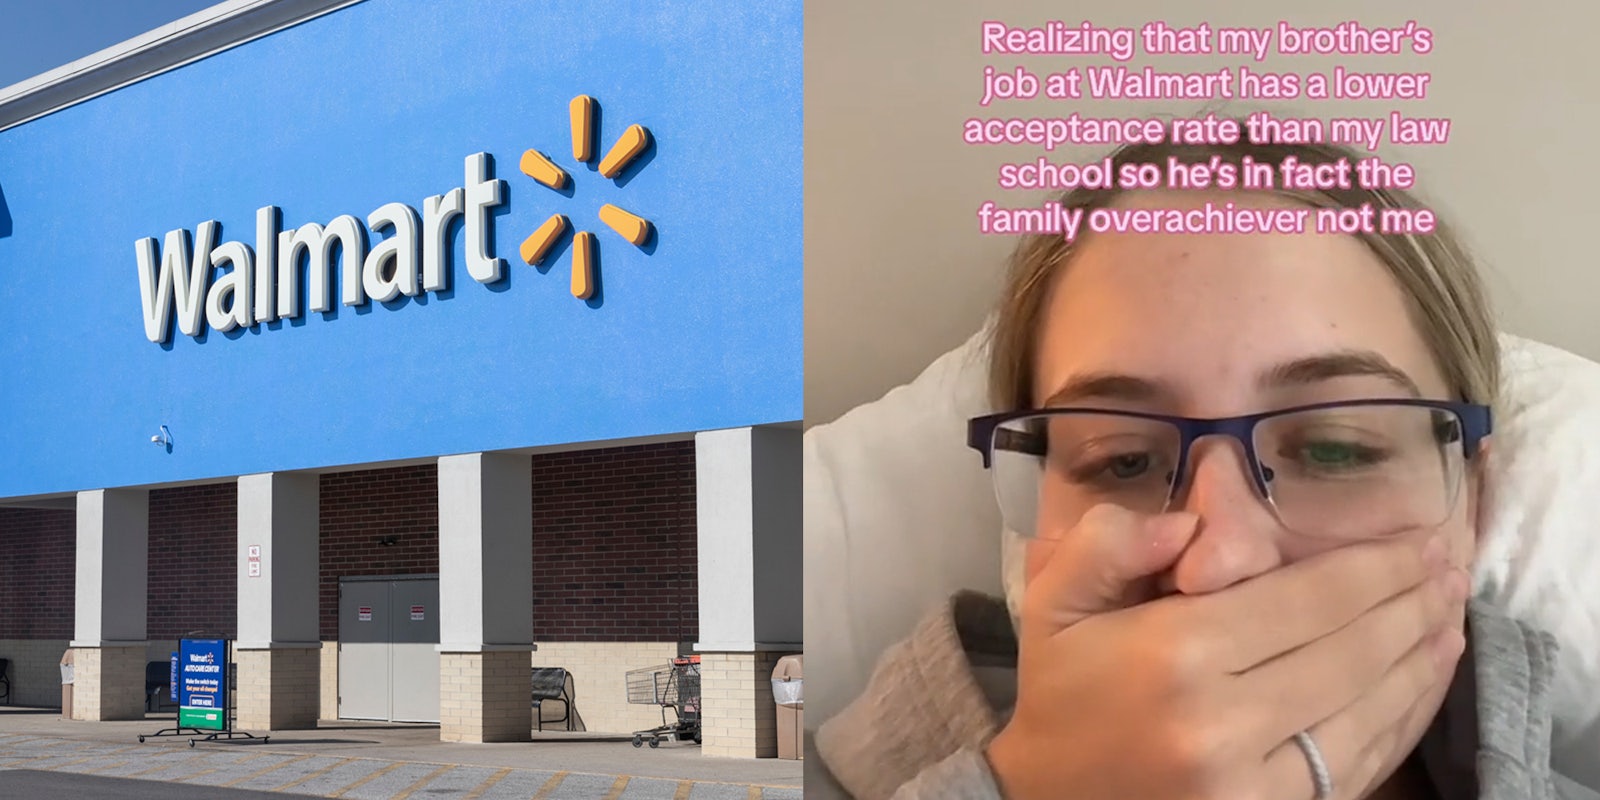 Walmart building with sign (l) woman with caption 'Realizing that my brother's job at Walmart has a lower acceptance rate than my law school so he's in fact the family overachiever not me' (r)